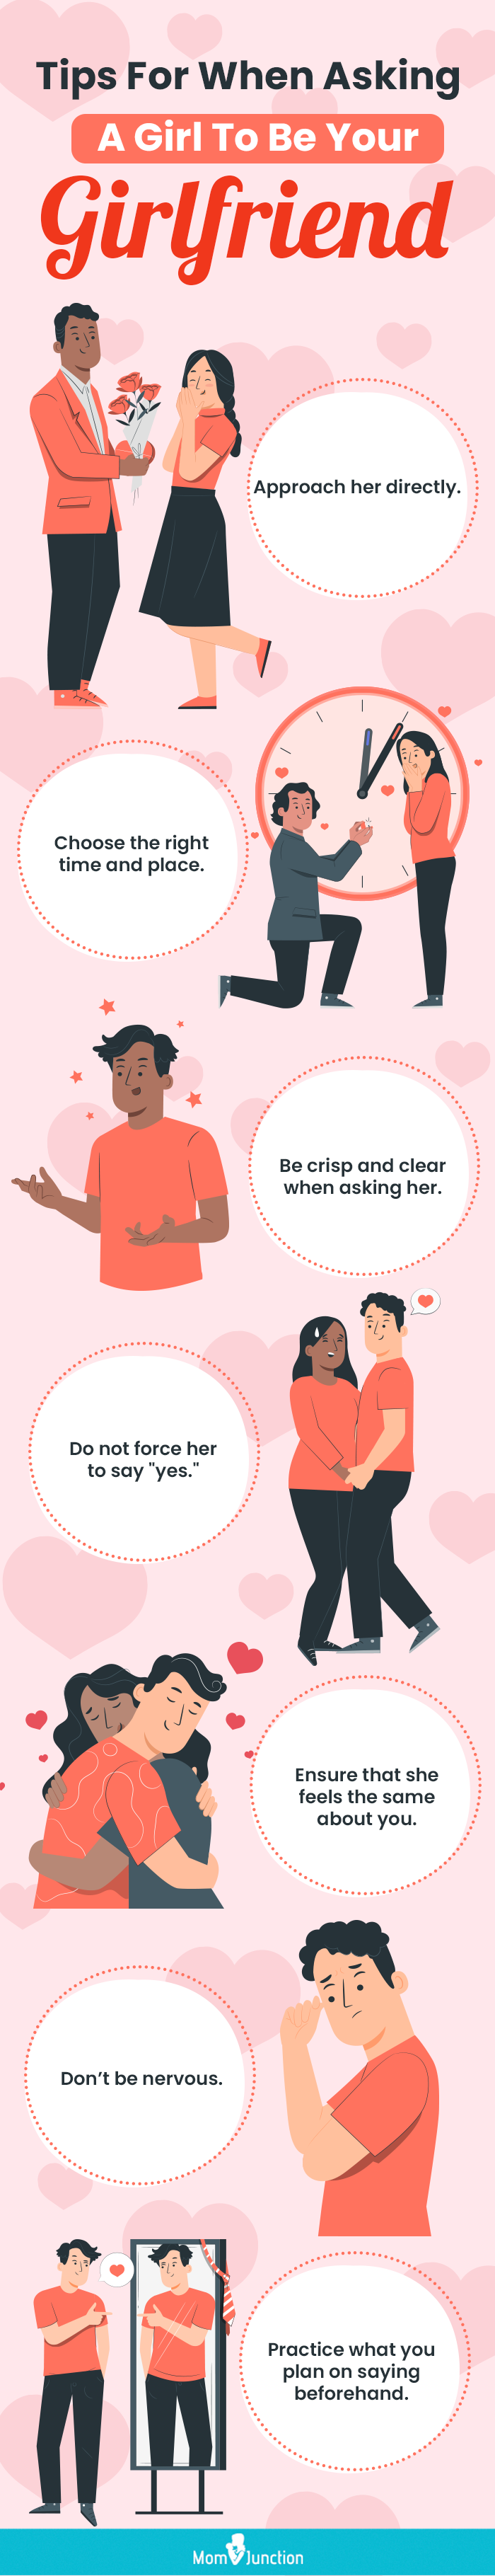 how to ask a girl out in a cute way in person